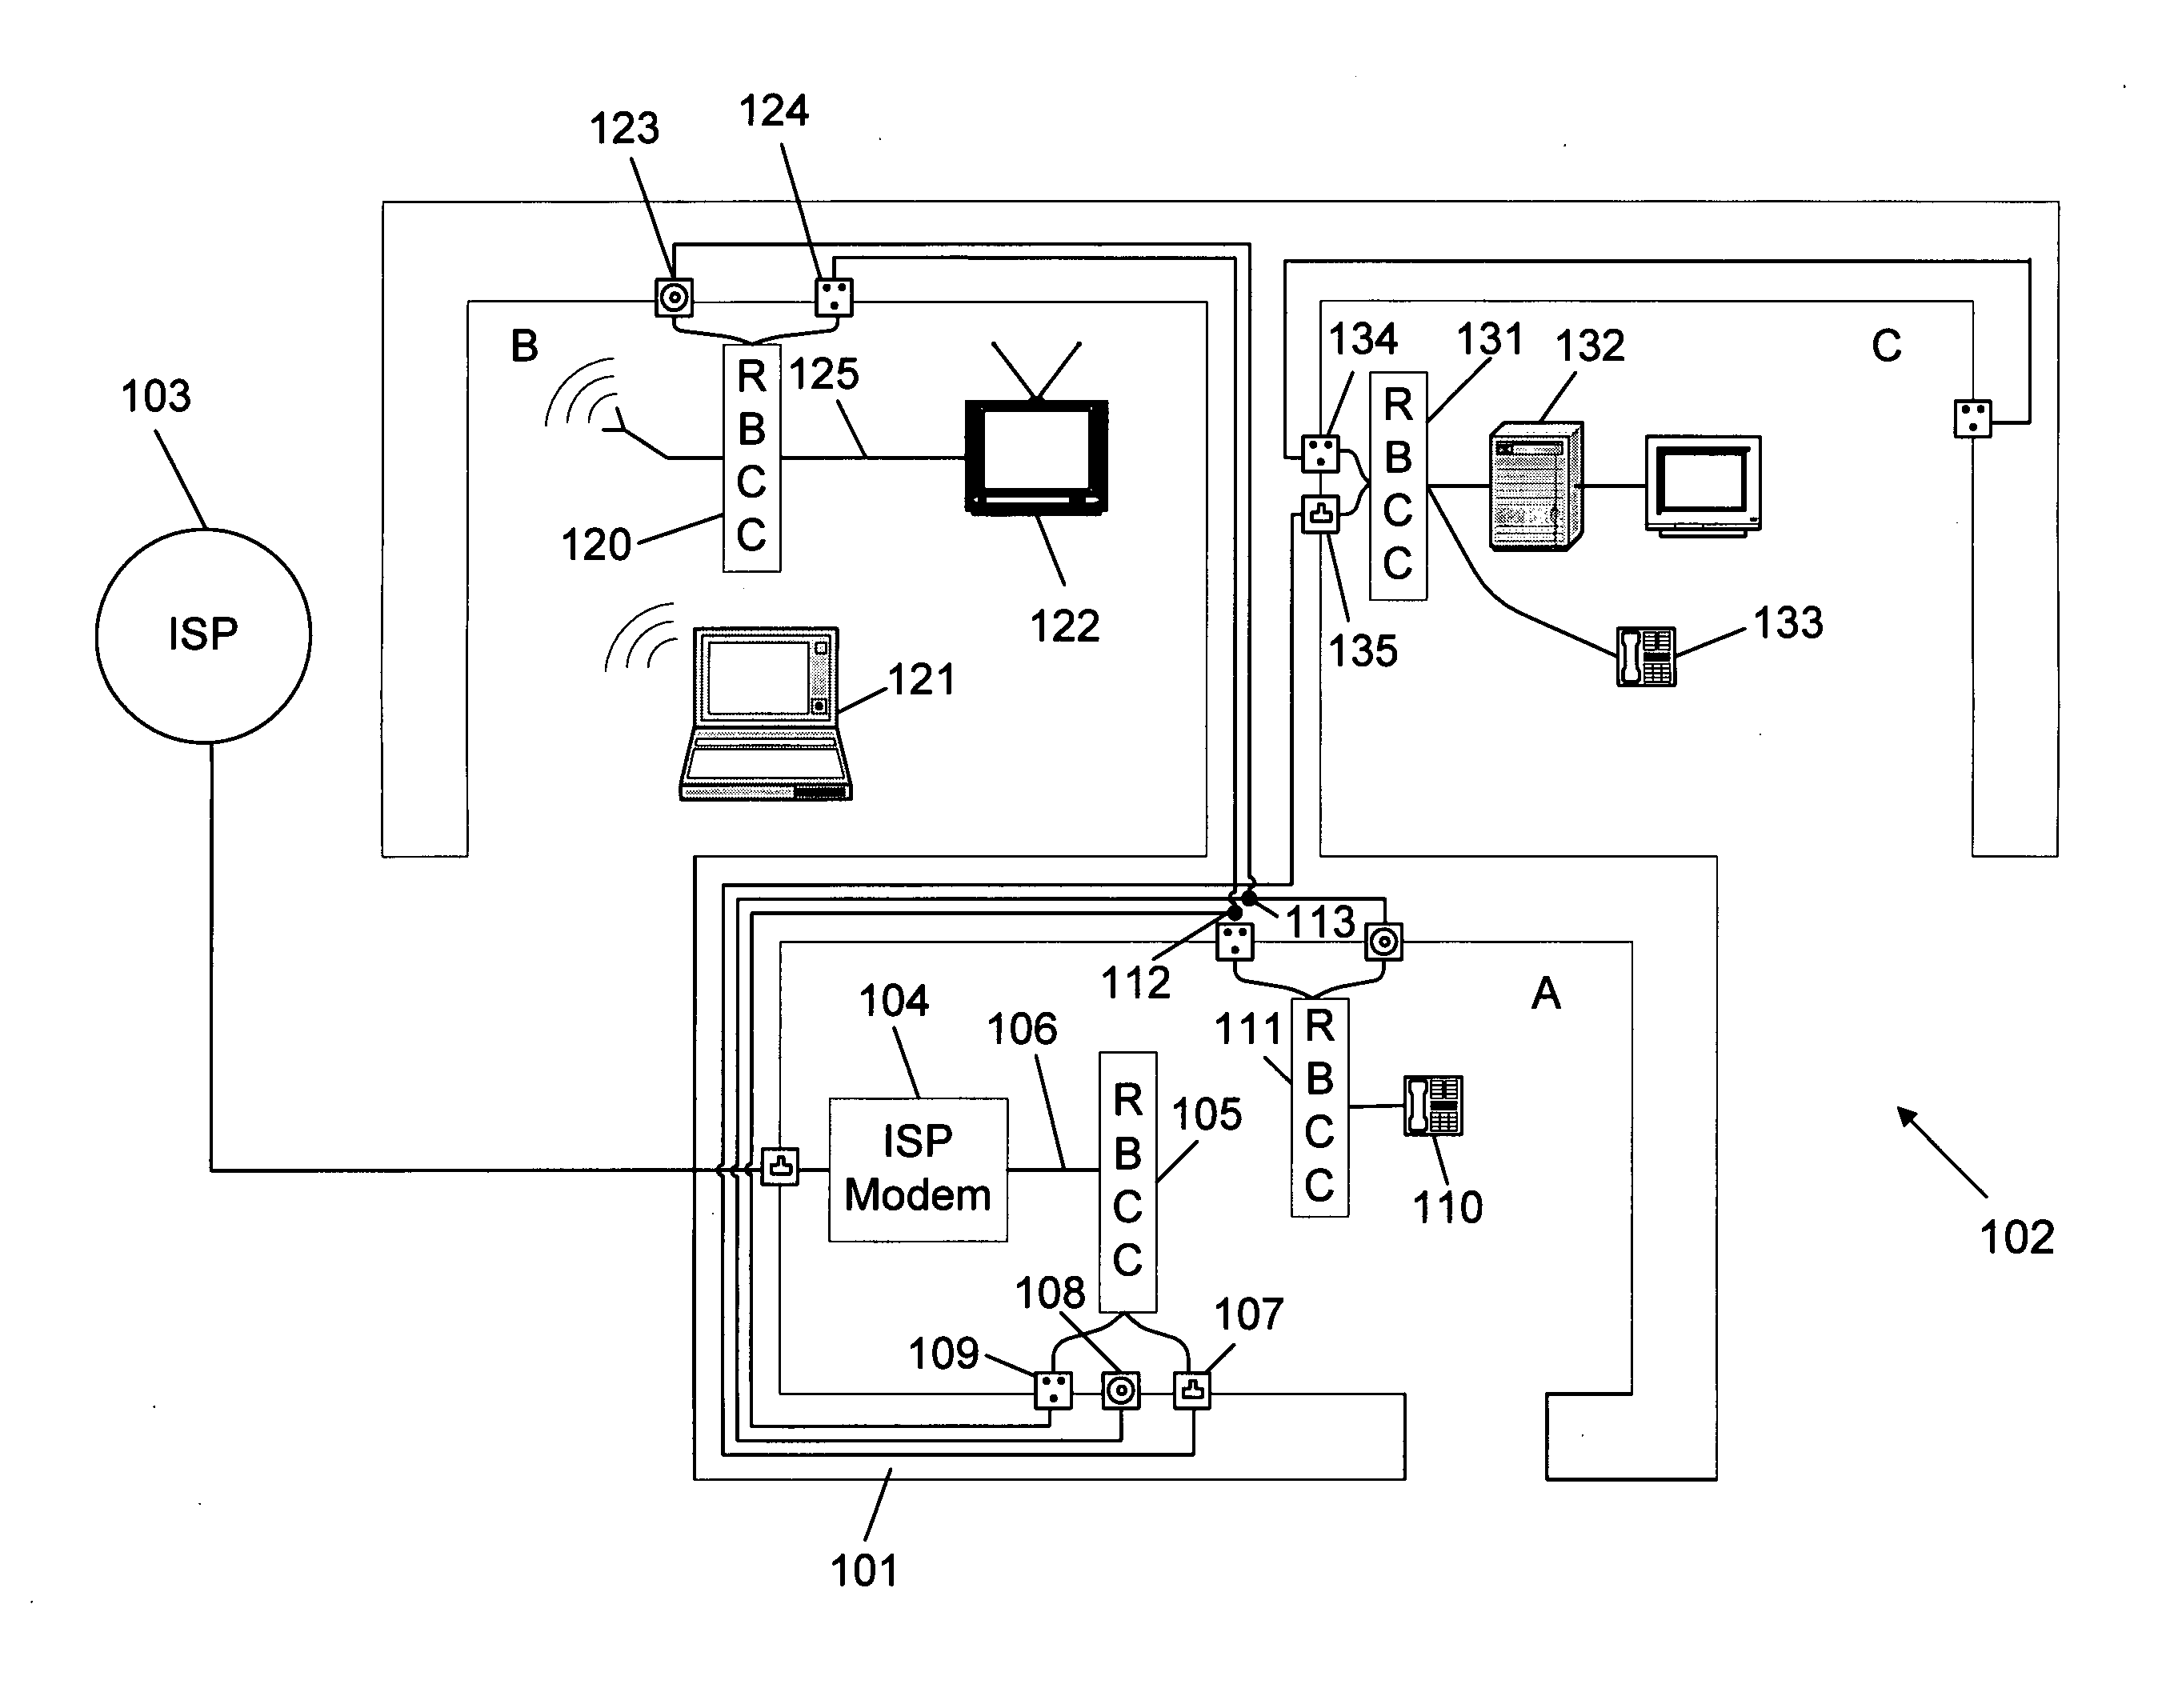 Home network apparatus